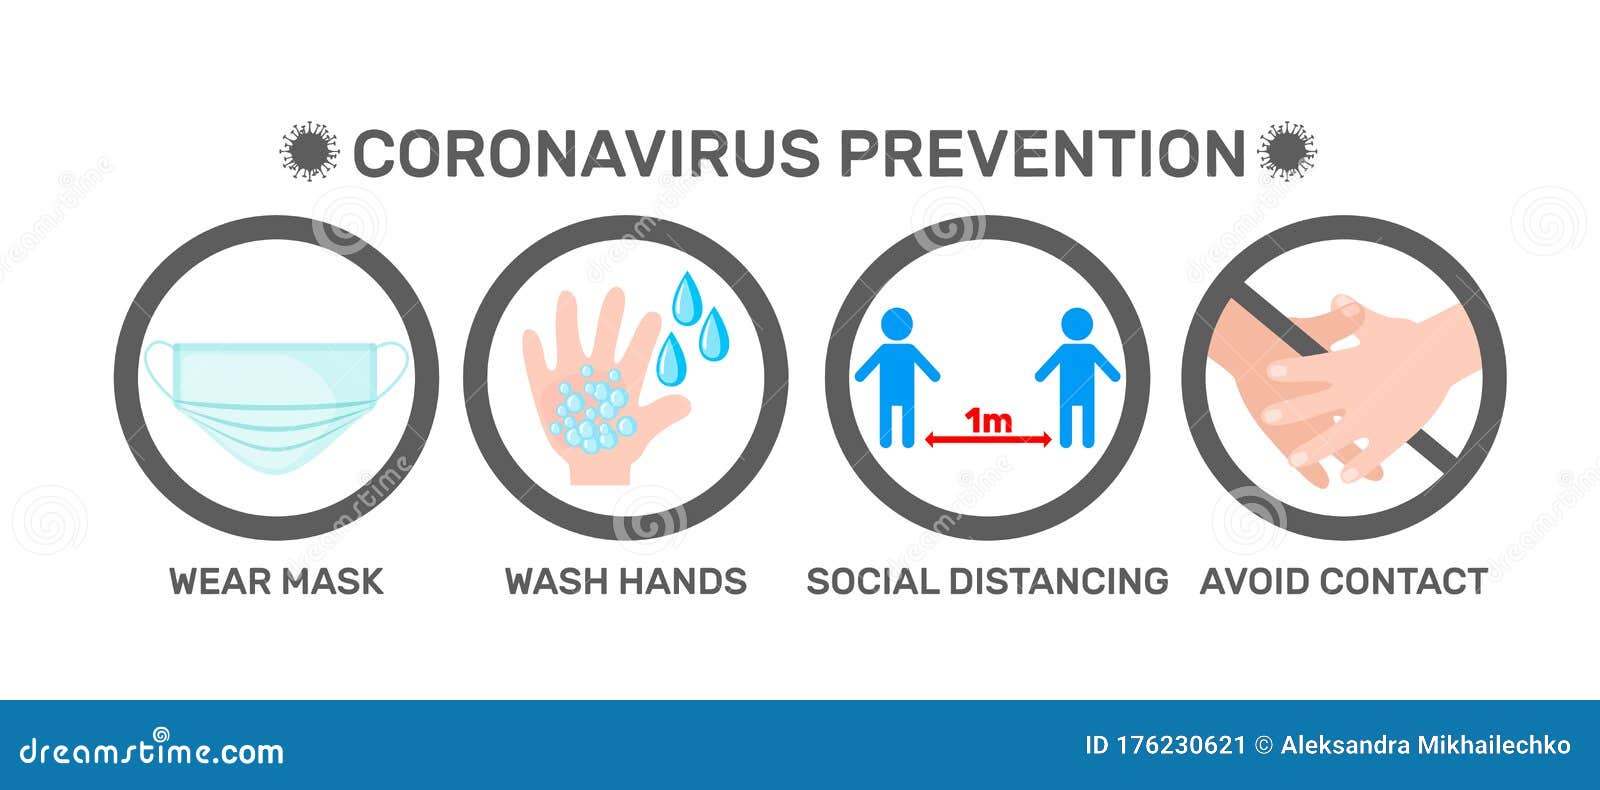 coronavirus prevention icons in flat style  on white background